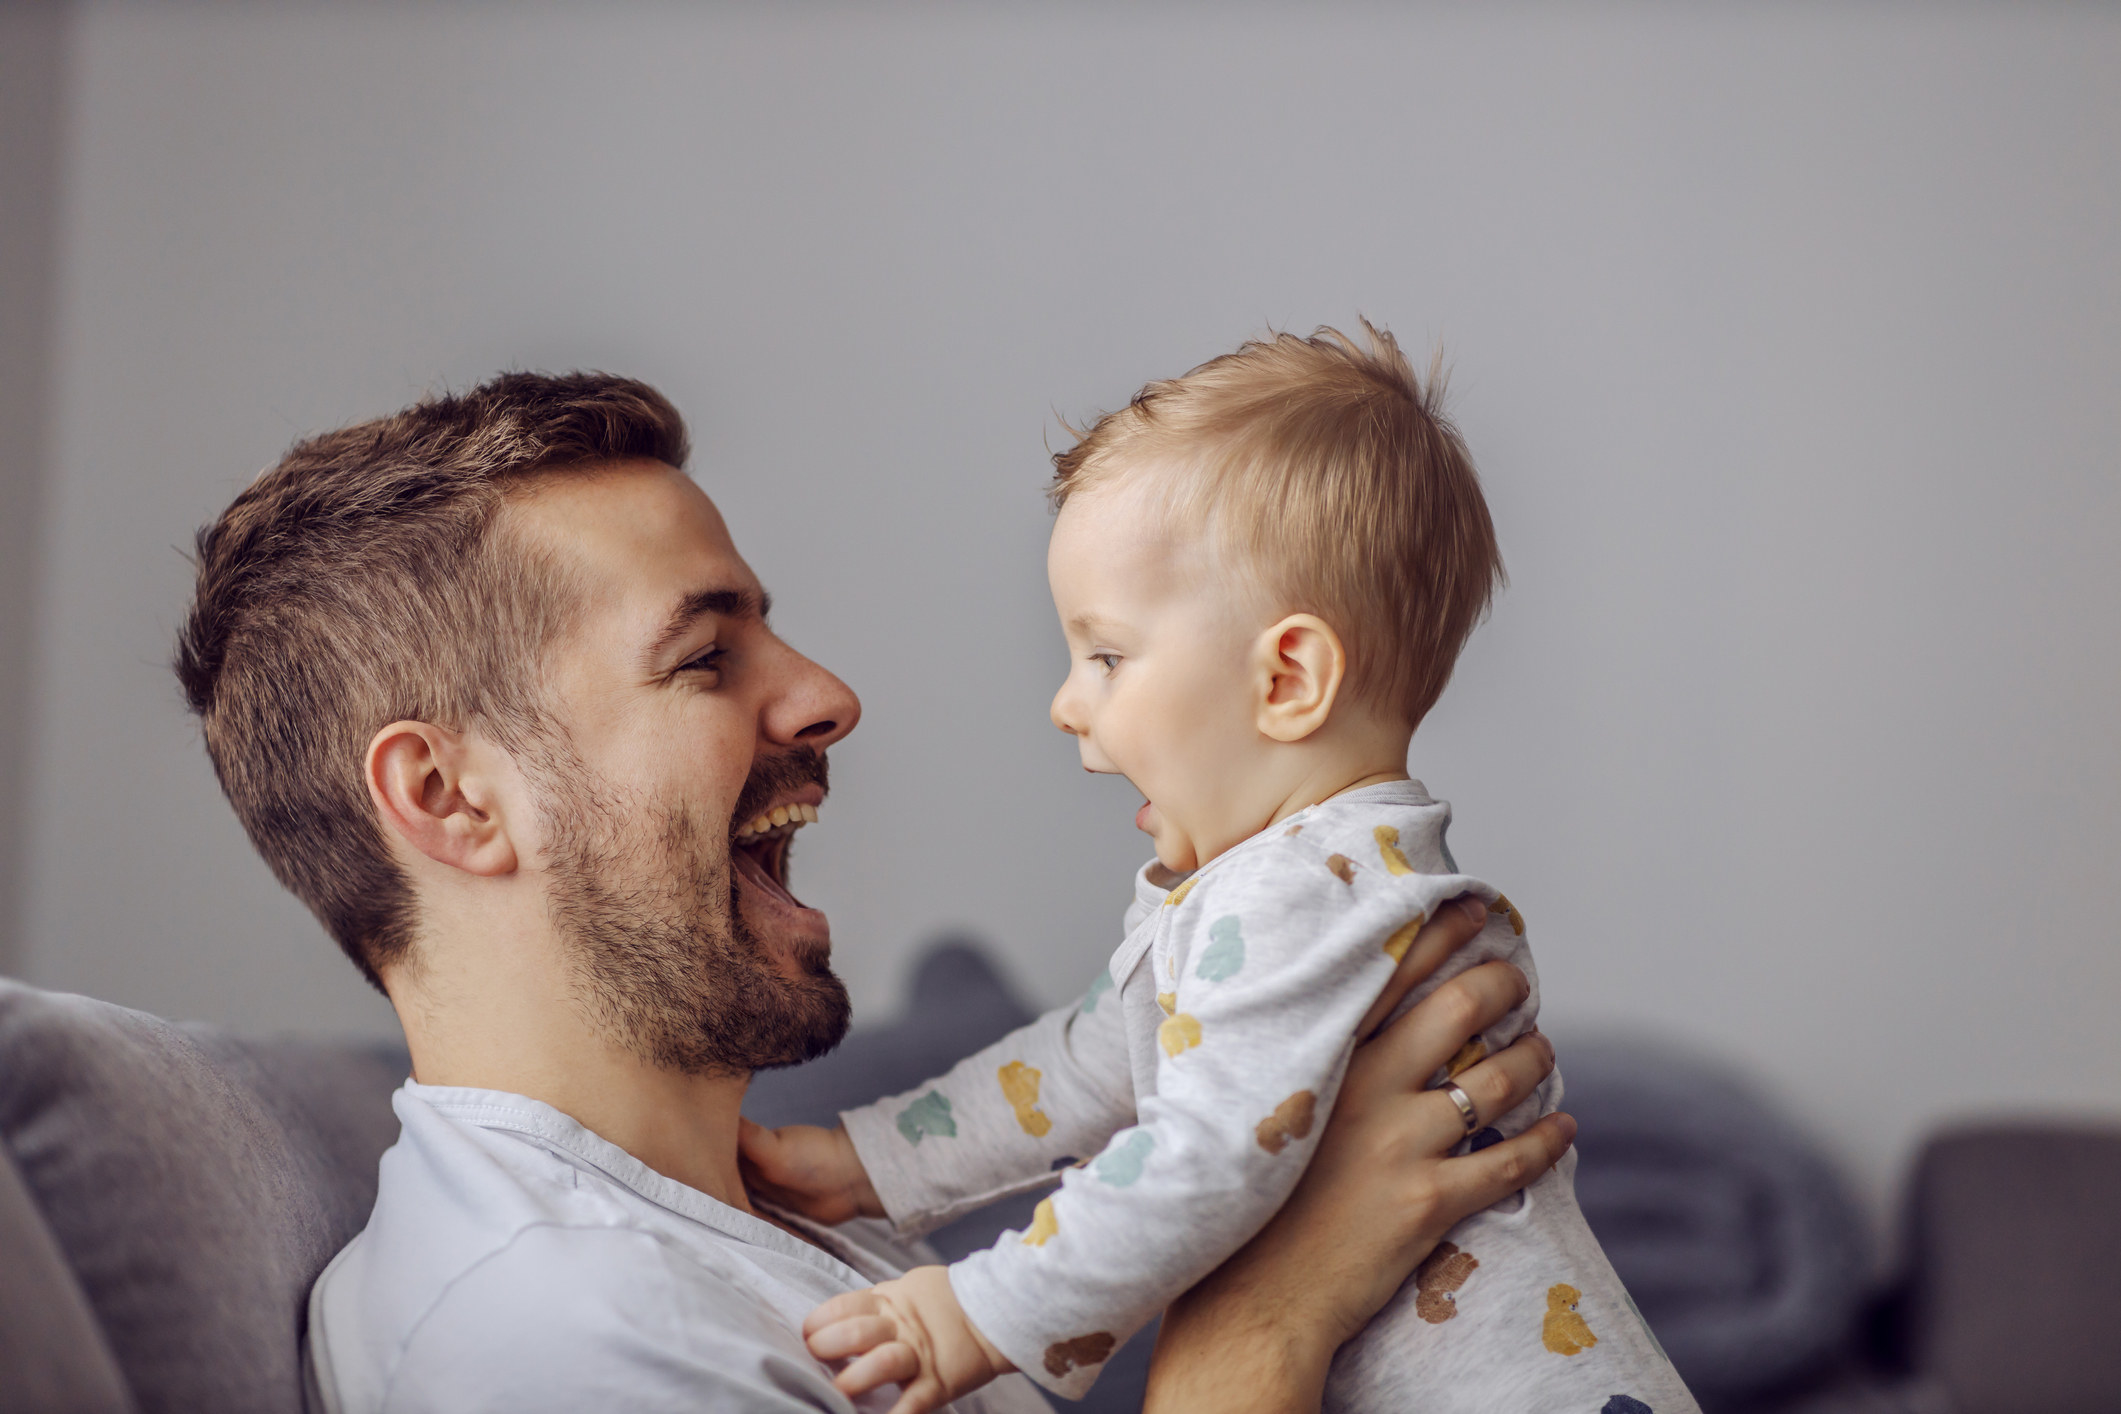 A father opens his mouth and smiles as he holds his baby